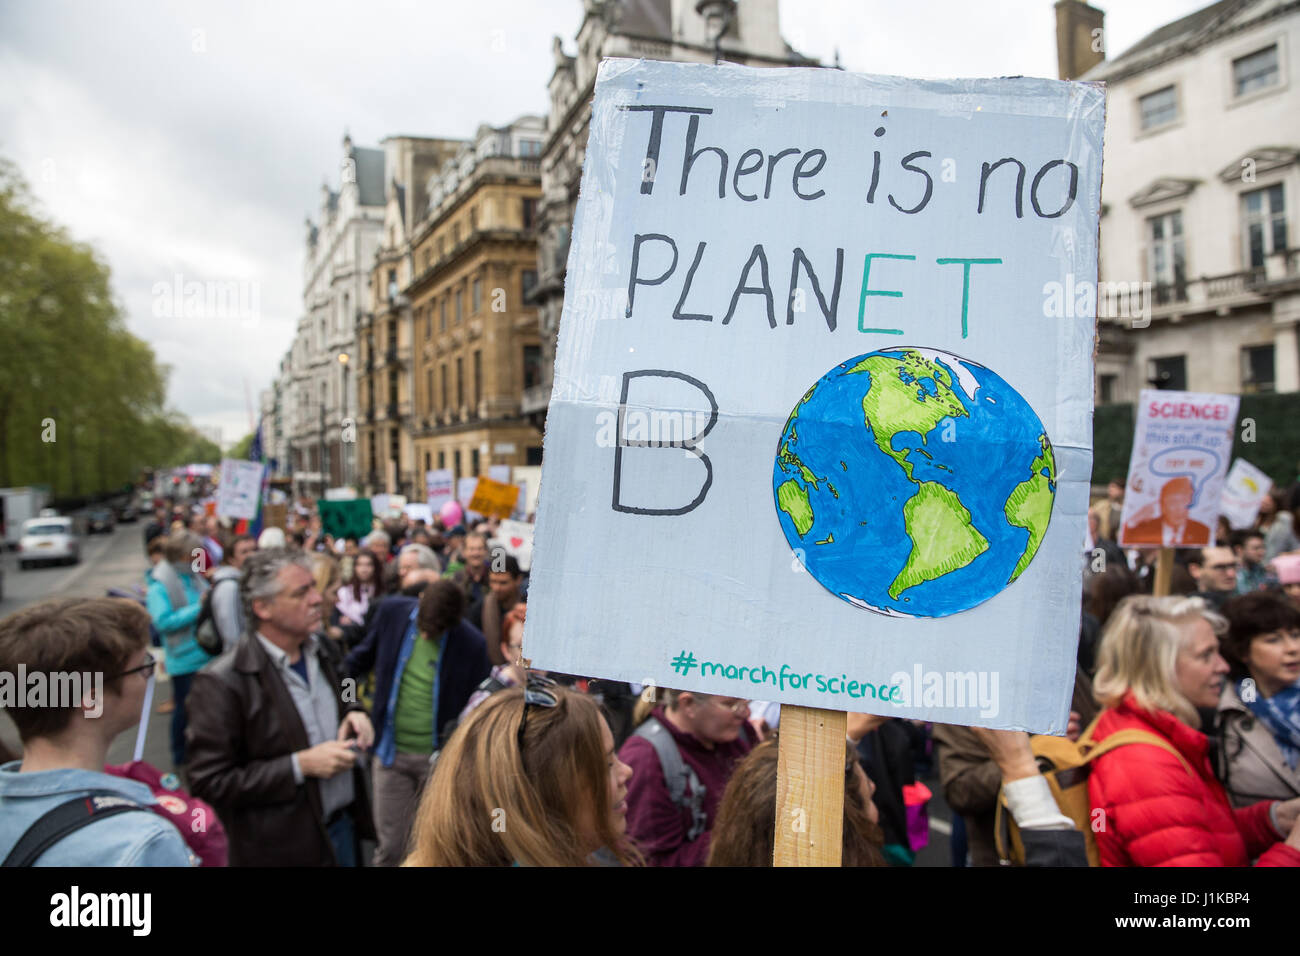 London, UK. 22nd Apr, 2017. Scientists march through central London on the ‘March for Science' as part of a global protest march in the name of science. The organisers of the march, which took place on Earth Day, stated that science is ‘under attack' from the administration of President Trump, with cuts to research funding into climate change and cancer and controversial statements by advisors such as Scott Pruitt, head of the US Environmental Protection Agency, who denied that carbon dioxide emissions are a primary cause of global warming. Credit: Mark Kerrison/Alamy Live News Stock Photo